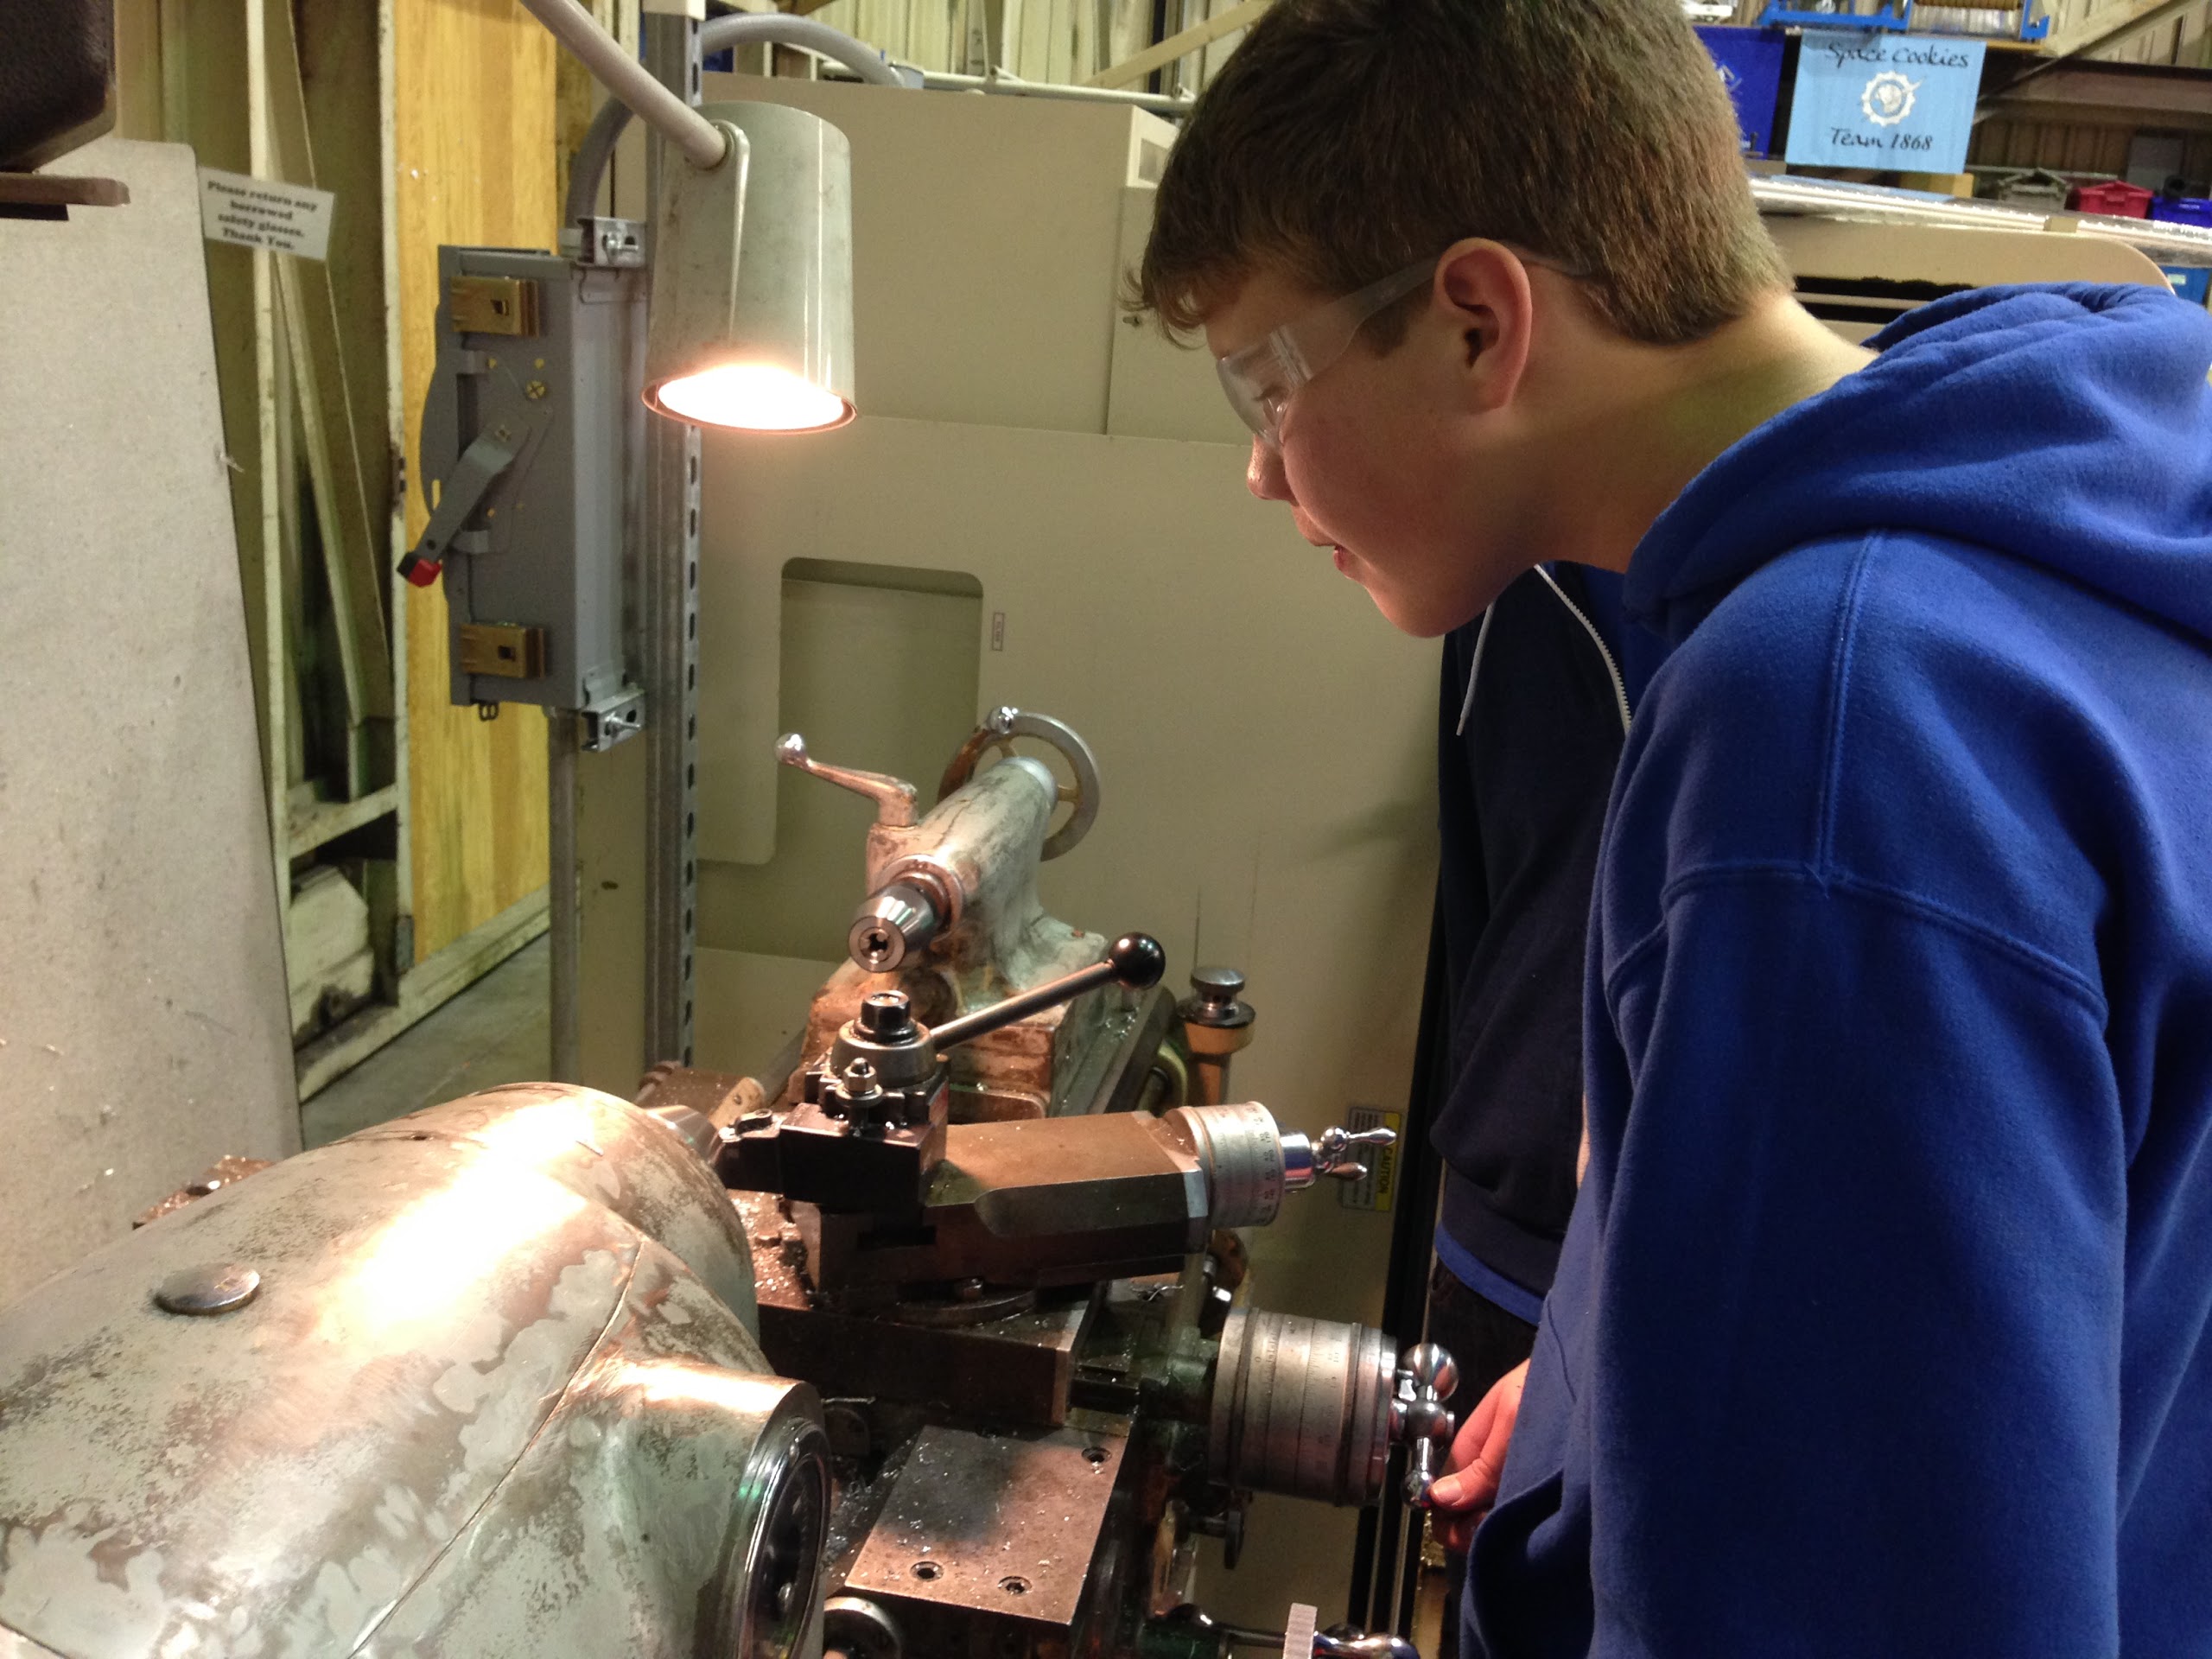 Students working on the lathe to machine parts for the control board